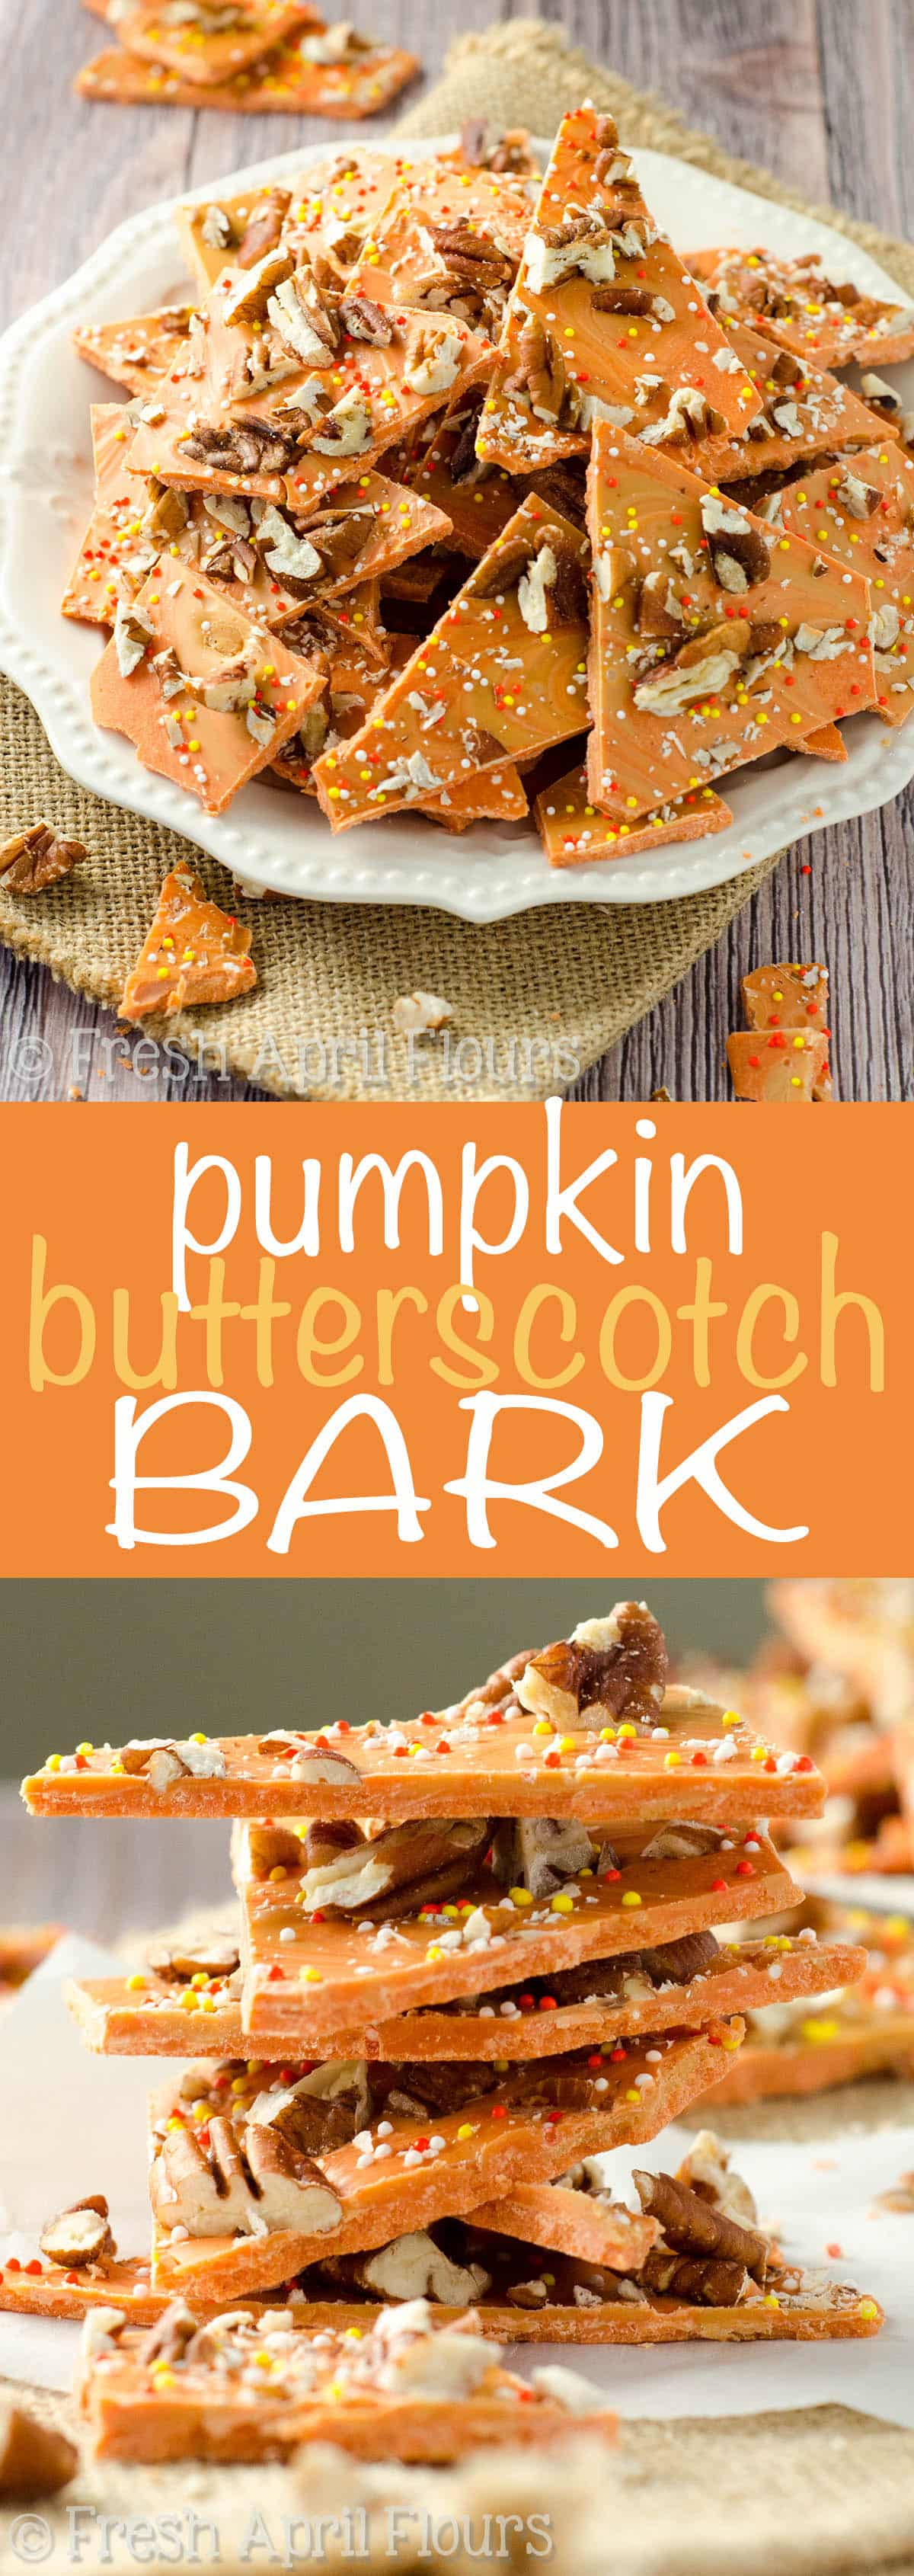 Pumpkin Butterscotch Bark: An easy bark made with pumpkin spice candy melts, butterscotch chips, and chopped nuts. Great for Halloween goodie bags! via @frshaprilflours